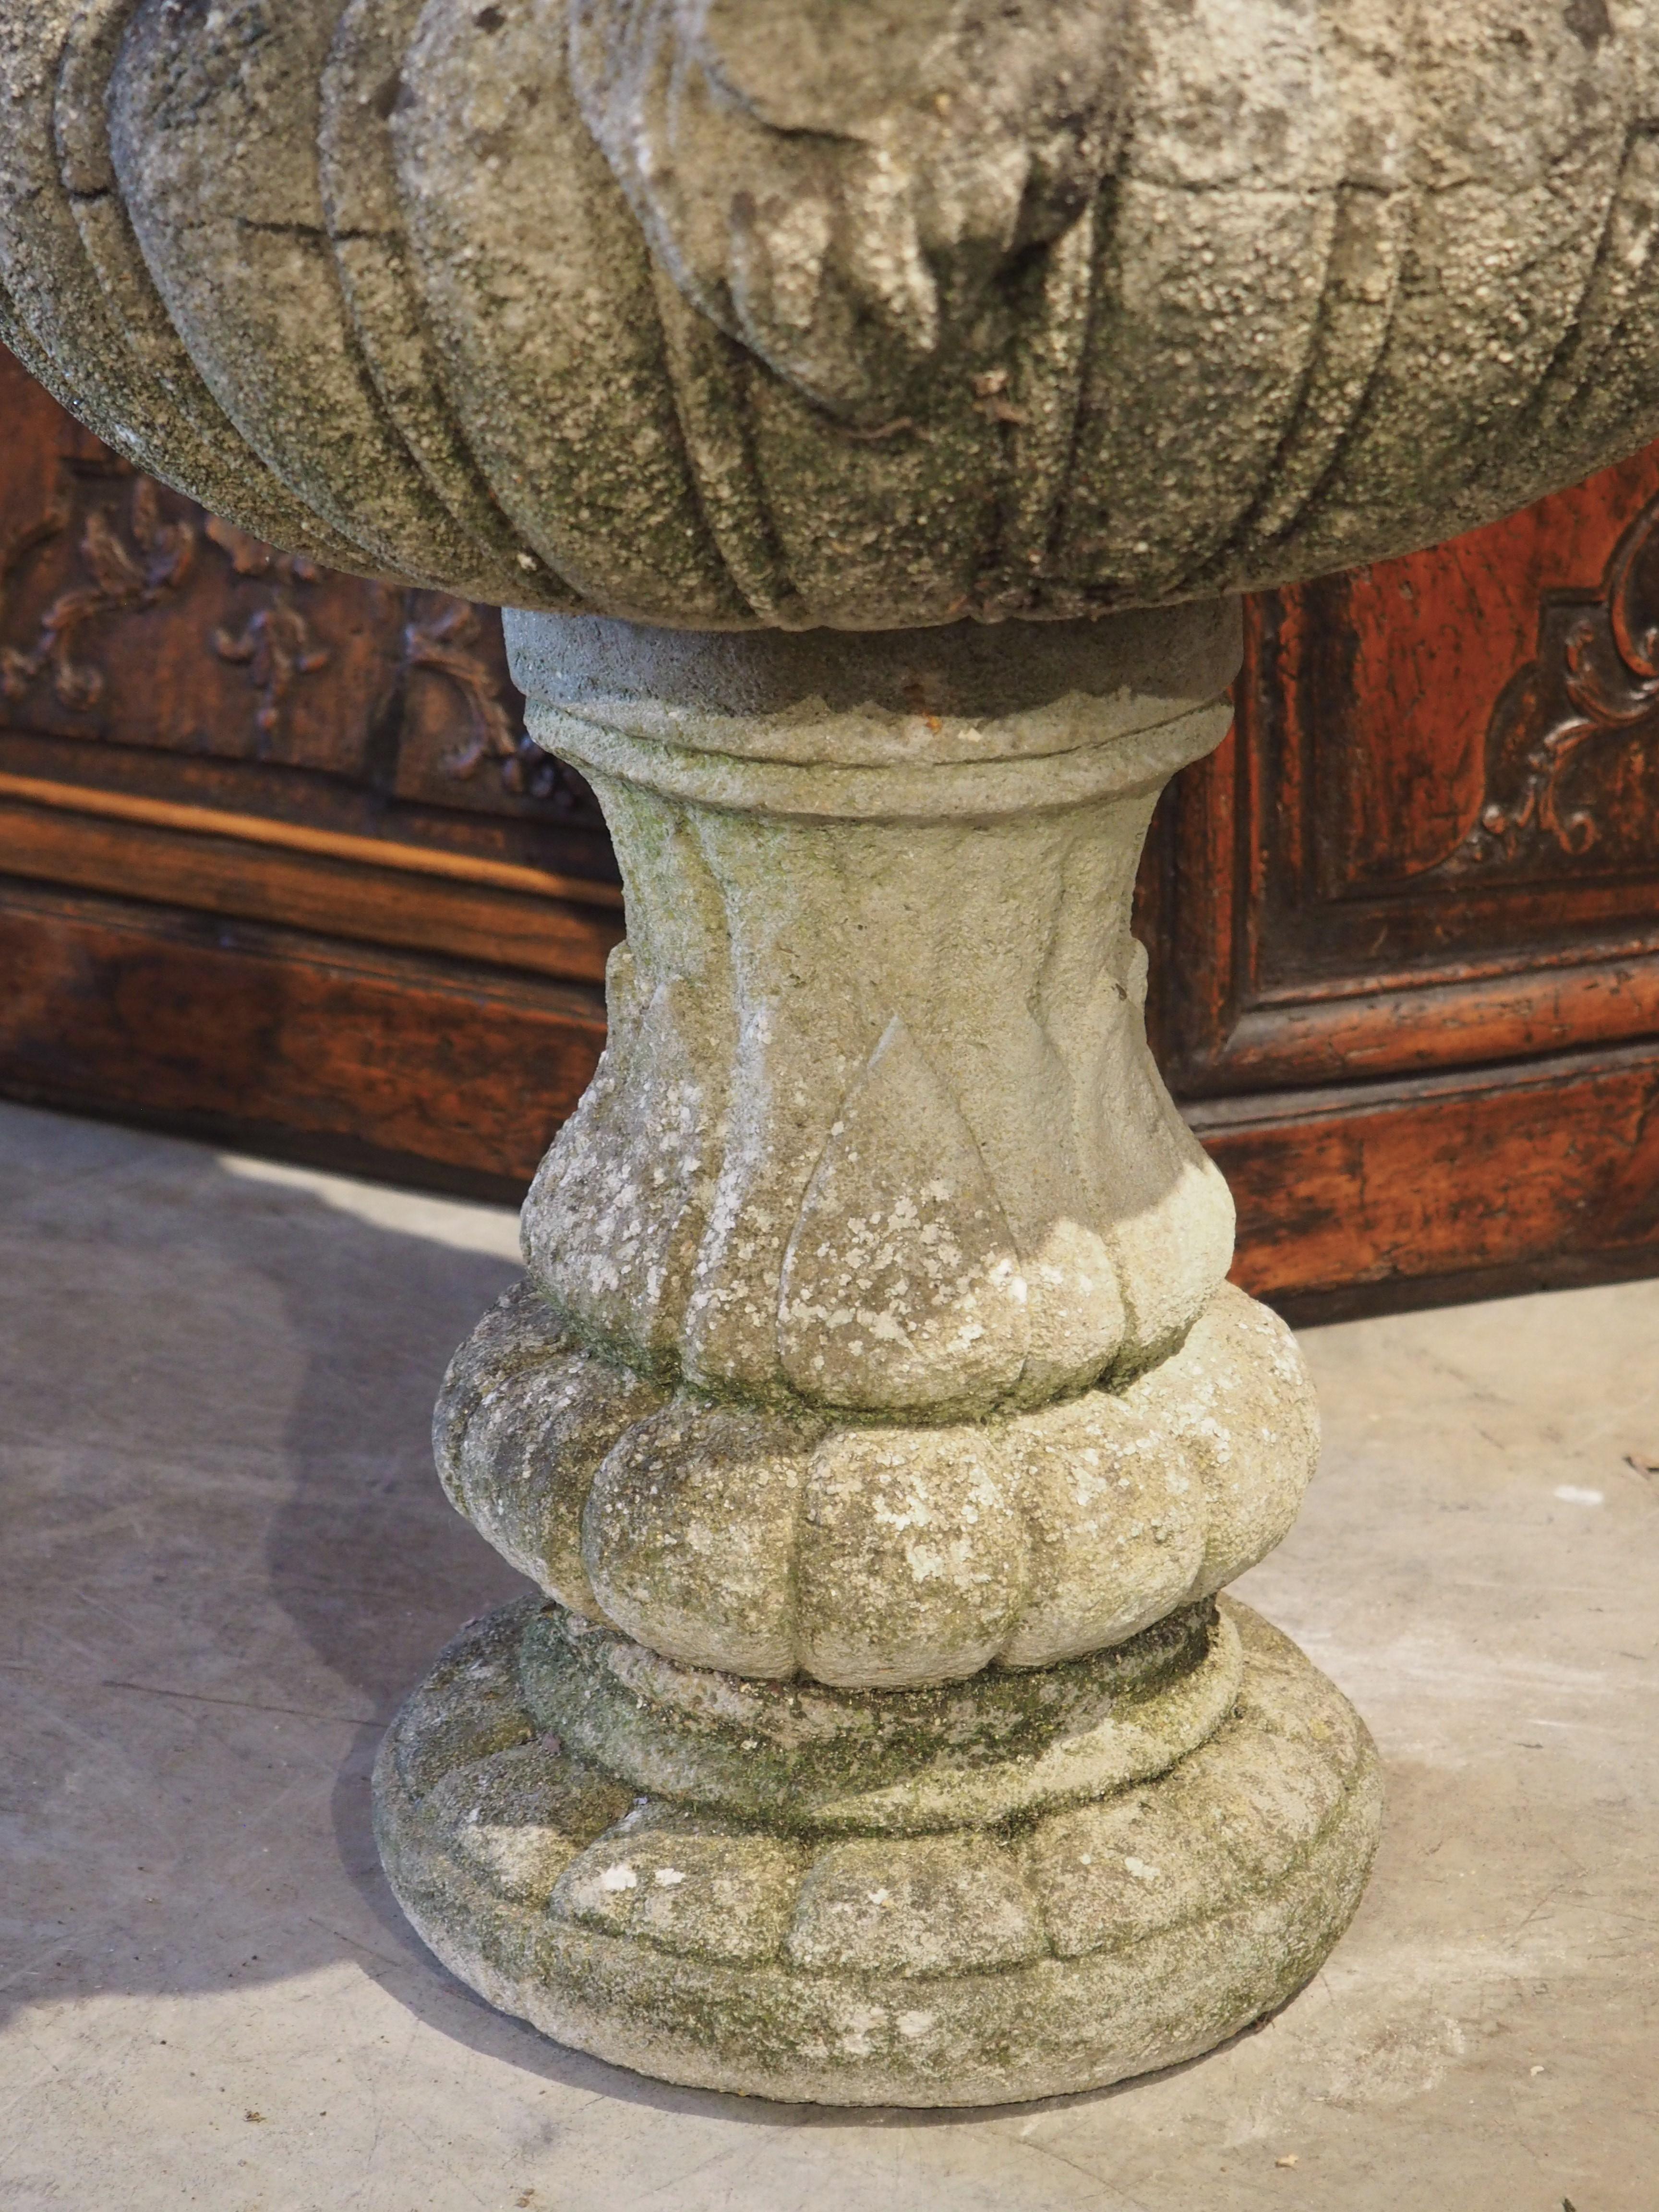 Made from reconstituted stone in the 1900s, this French vase aux beliers (vase with rams) was cast in two pieces. The main body is adorned with thick gadroon lobes under a deep cavetto cornice, which is interrupted by two ram mascarons on opposing